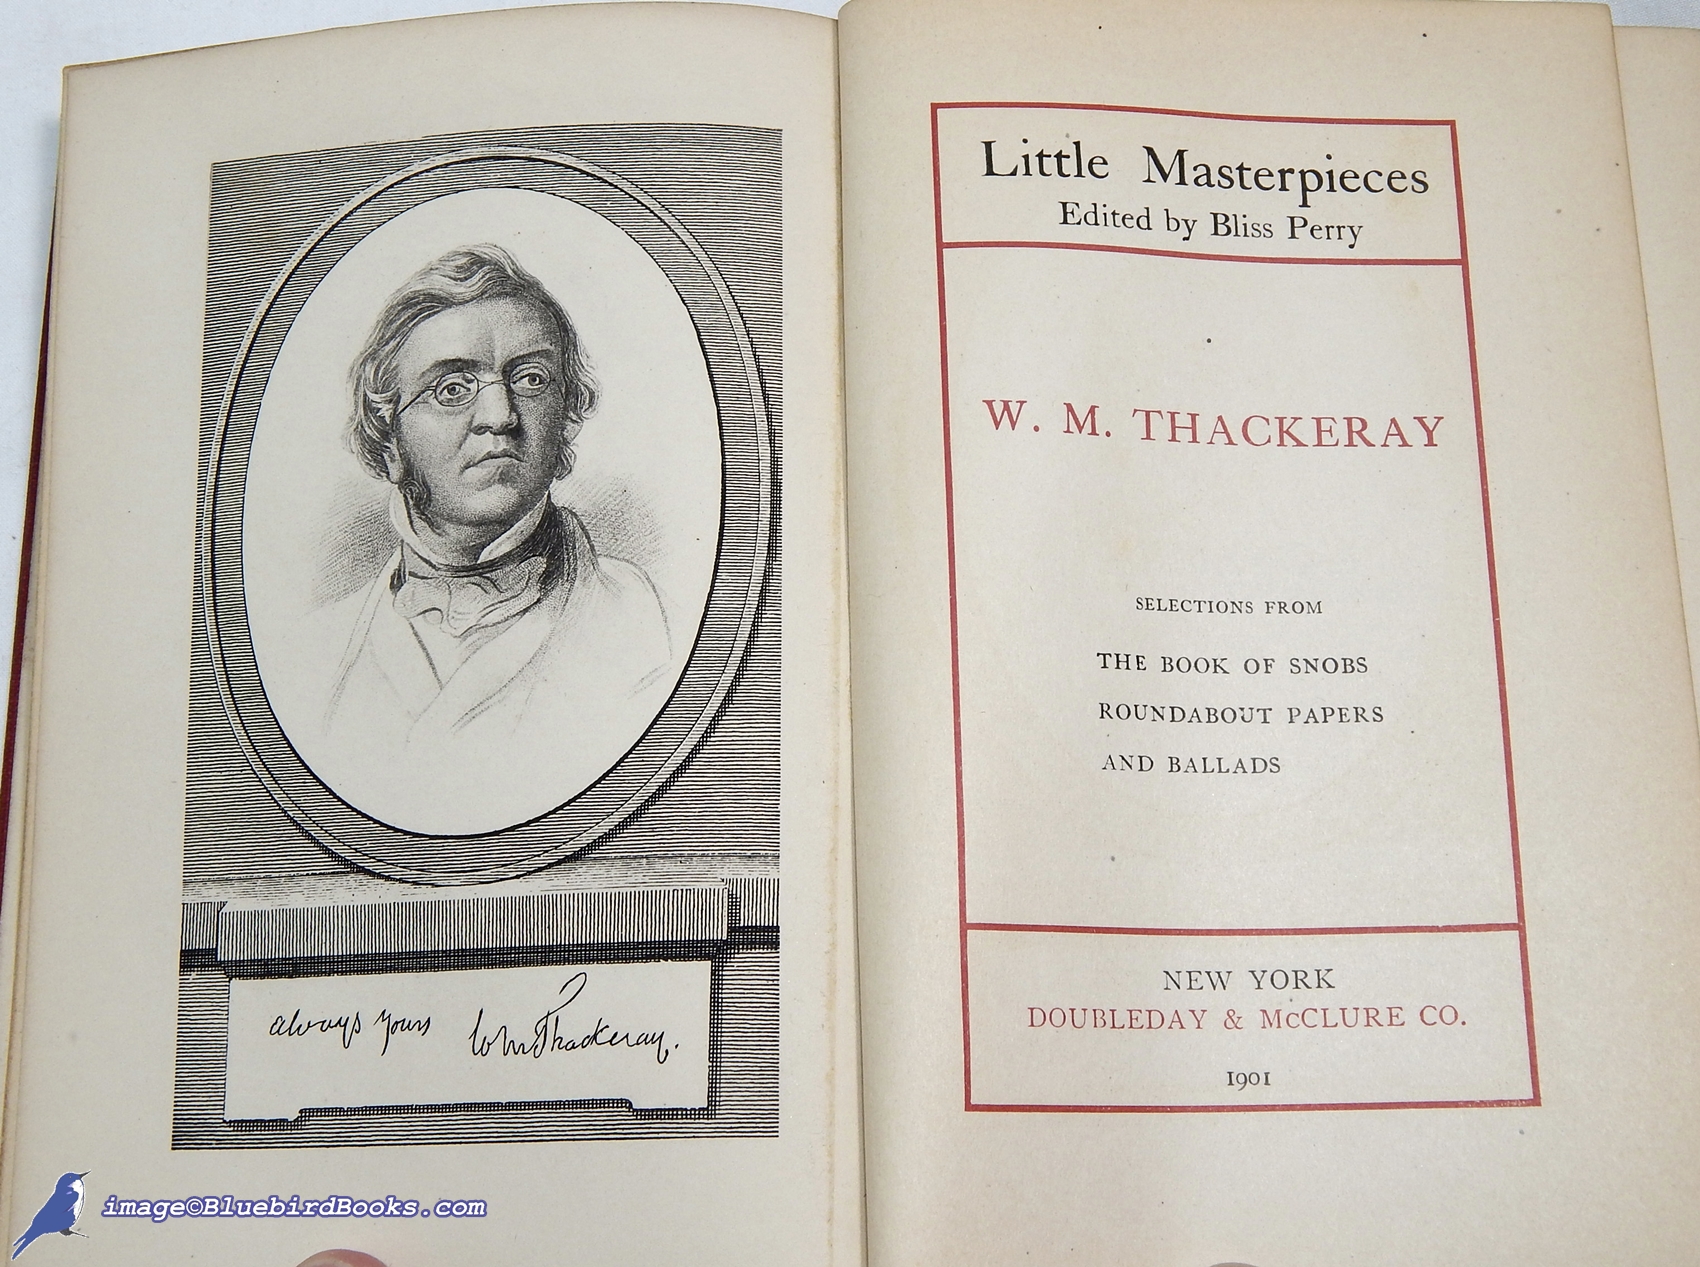 THACKERAY, W.[ILLIAM] M.[AKEPEACE] (AUTHOR); PERRY, BLISS (EDITOR) - Little Masterpieces: W.M. Thackeray, [Selections from His Writings]